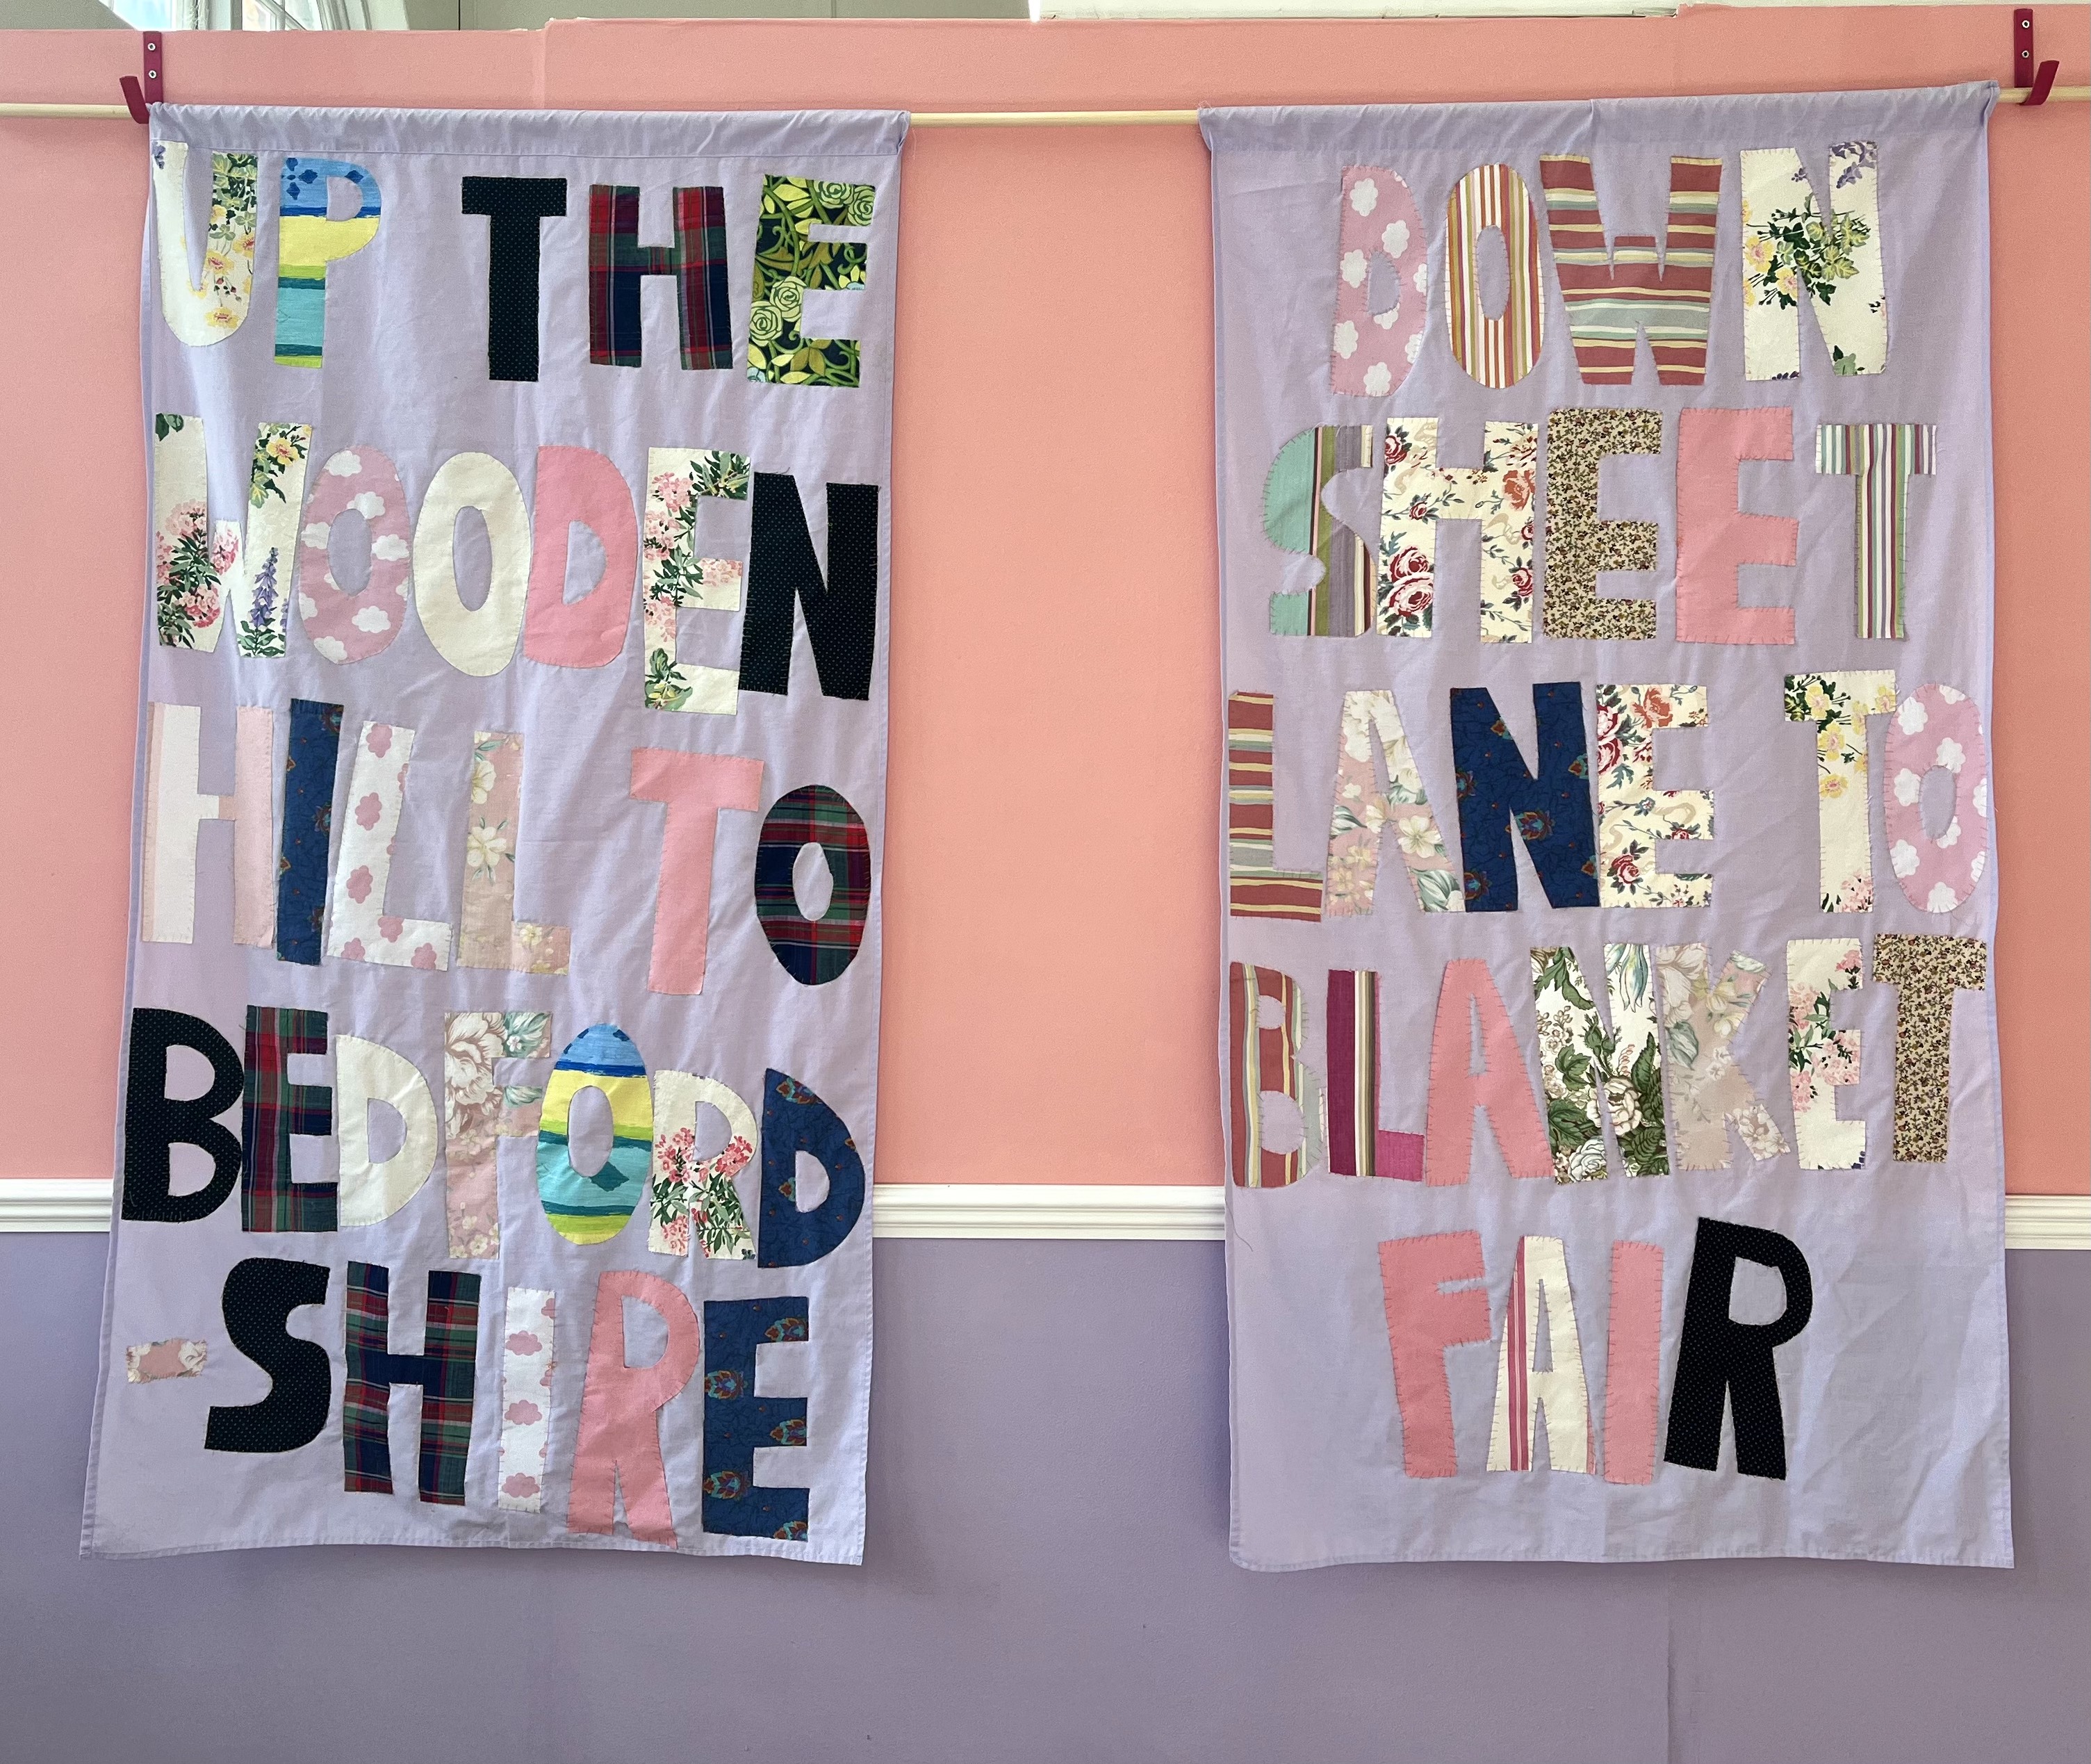 Textile hanging by Amber-Rose Thorpe, the hangings have hand-sewn applique on them that reads 'UP THE WOODEN HILL TO BEDFORDSHIRE, DOWN SHEET LANE TO BLANKET FAIR'.